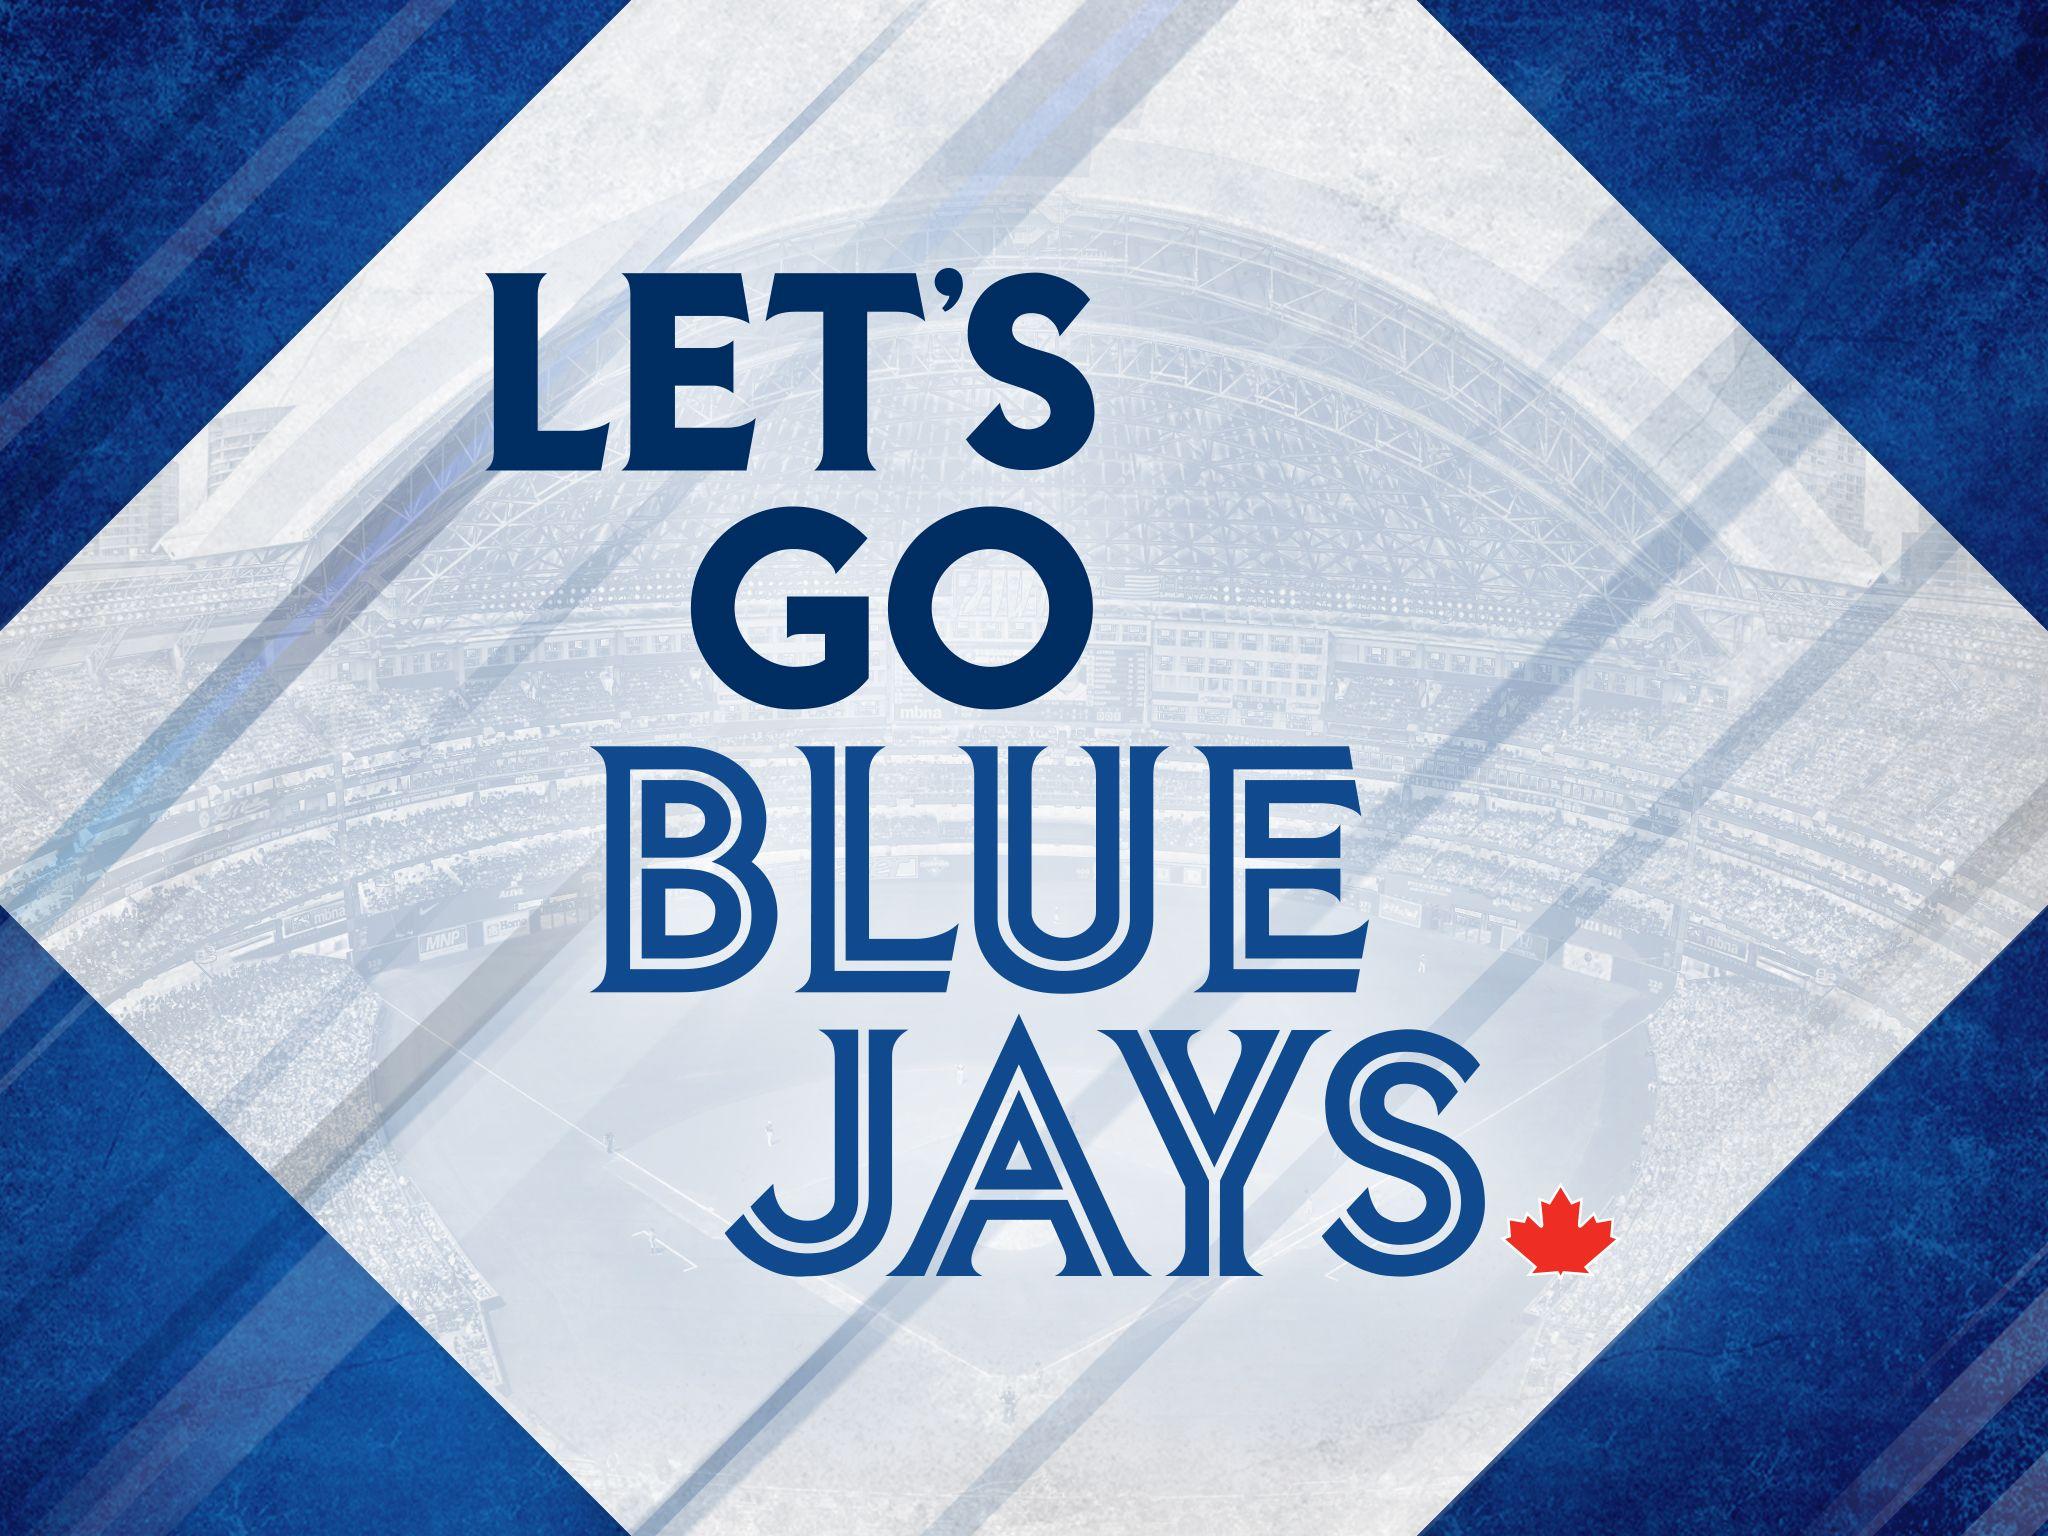 Wallpaper and Covers. Toronto Blue Jays